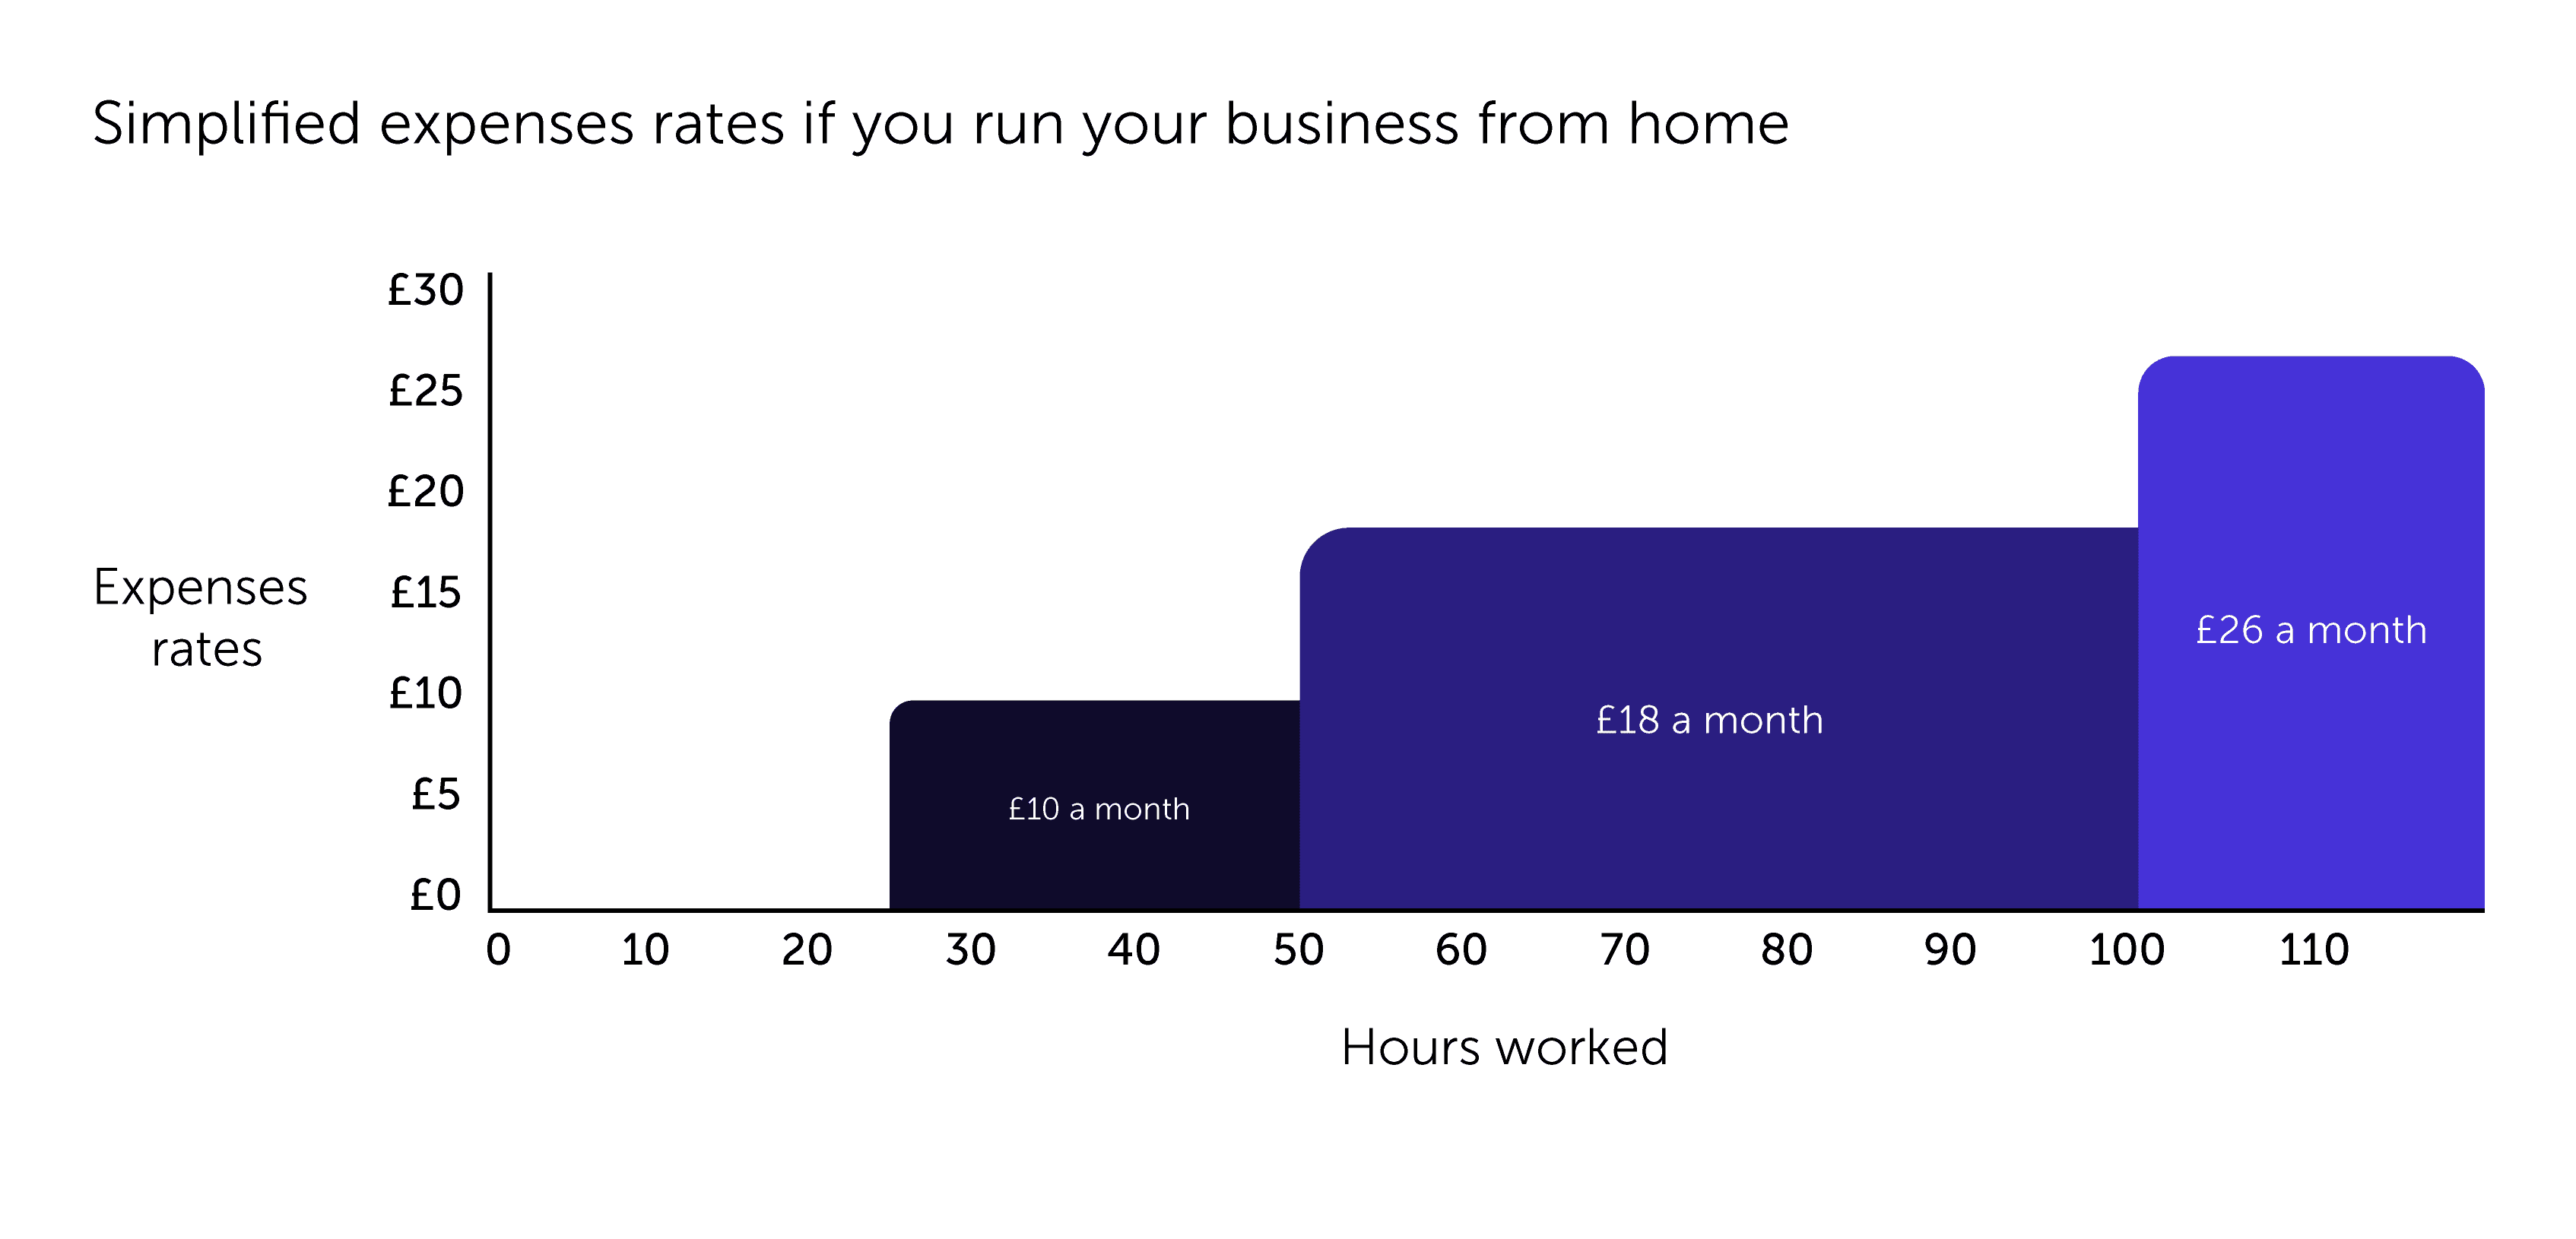 Simplified expenses rates if you run your business from home